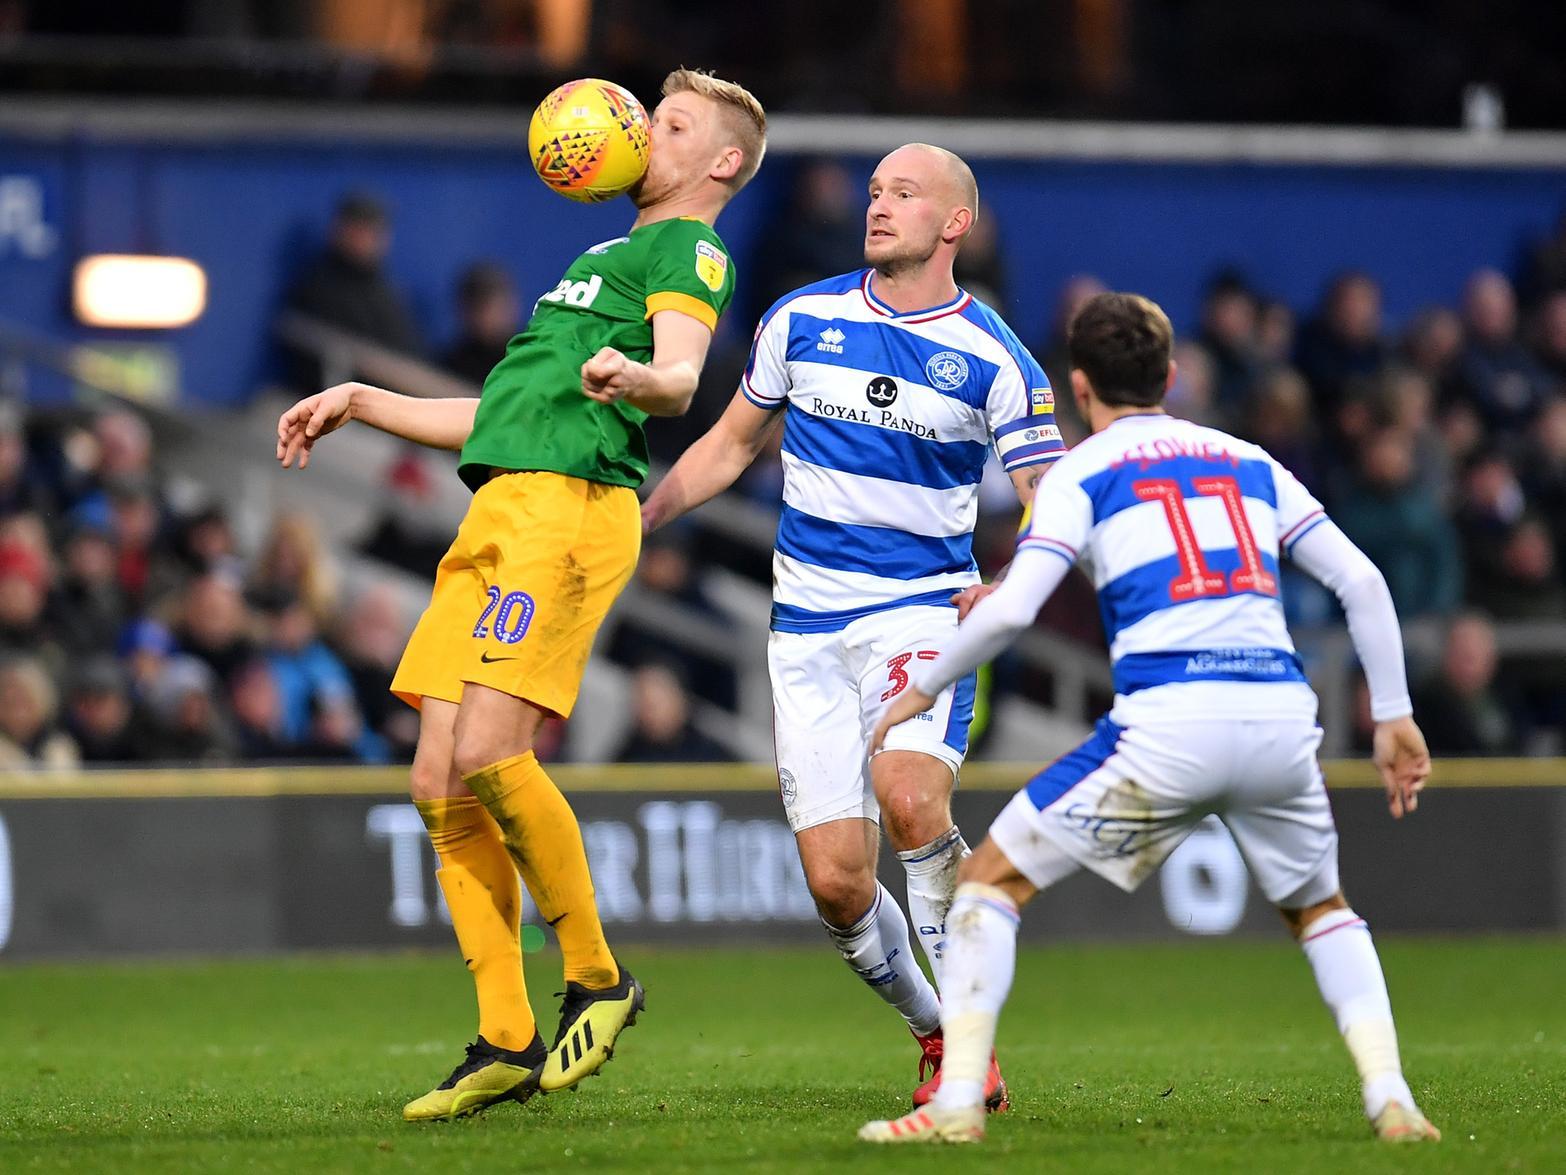 Preston North End striker Jayden Stockley has claimed that his side "mean business" this season, and suggested they'll be among the contenders to secure promotion in May. (Lancashire Evening Post)